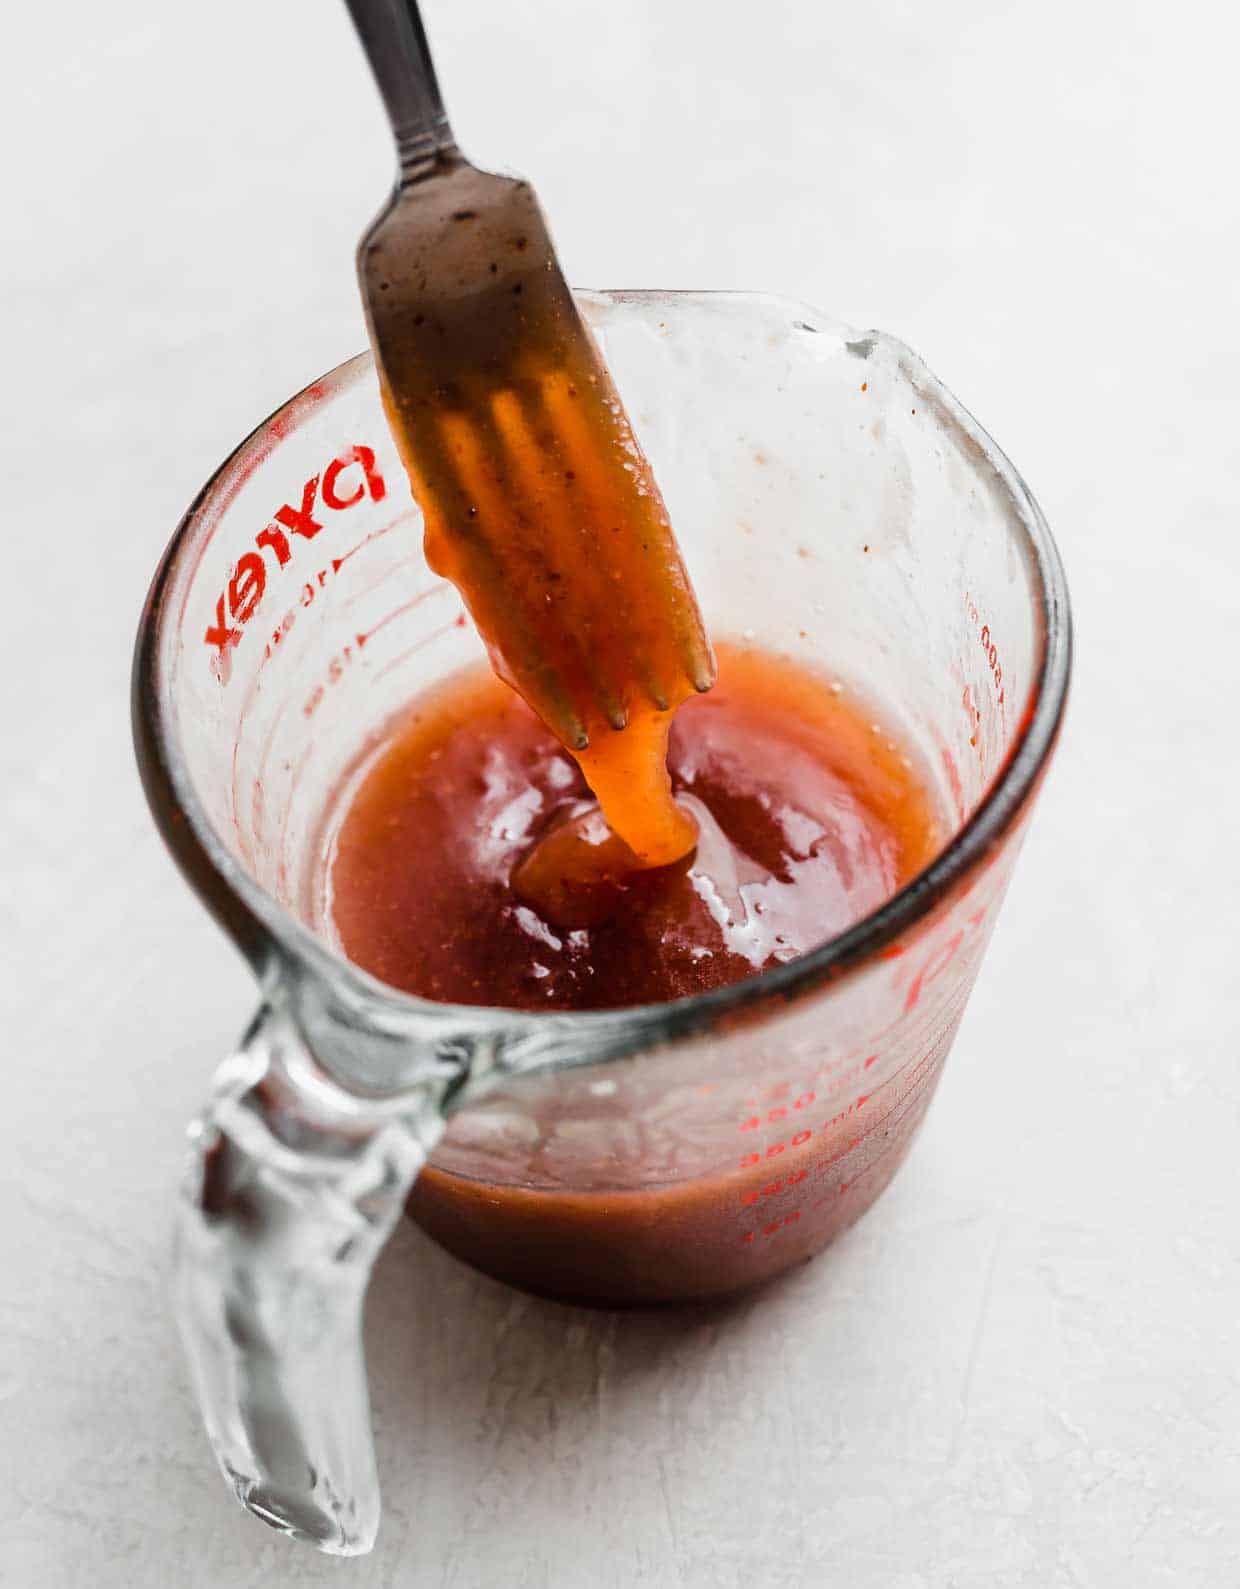 A homemade strawberry vinaigrette dressing in a glass measuring cup on a white background.